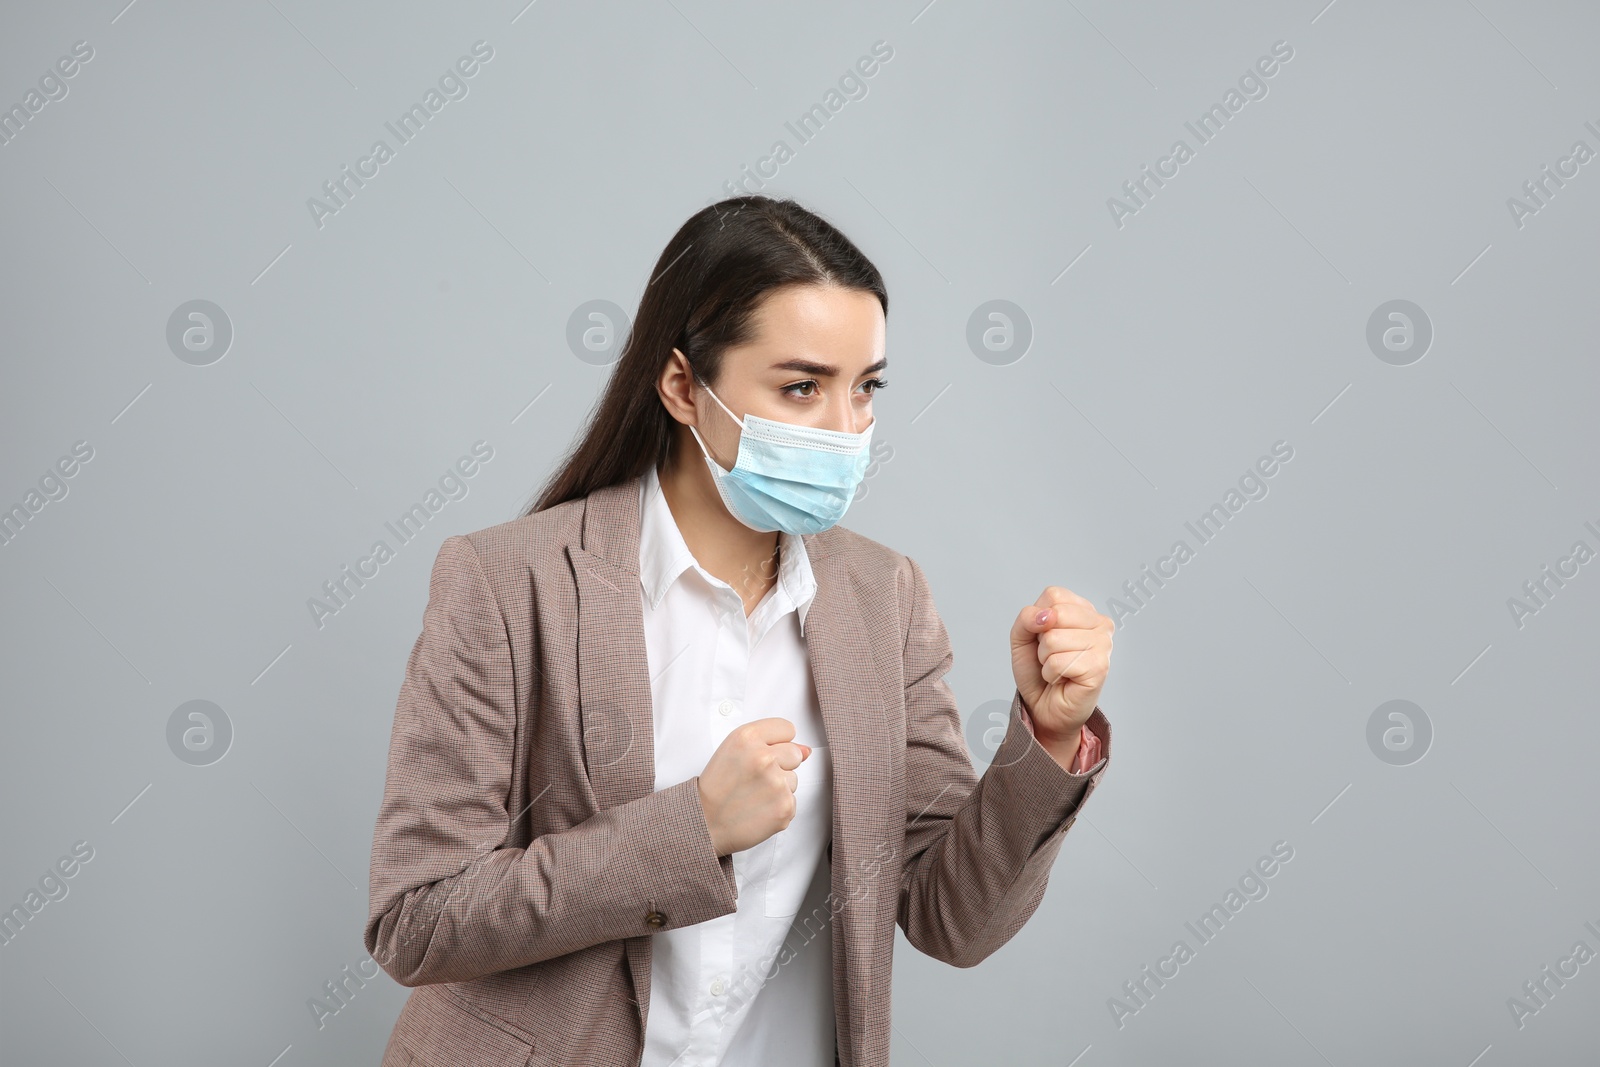 Photo of Businesswoman with protective mask in fighting pose on light grey background. Strong immunity concept